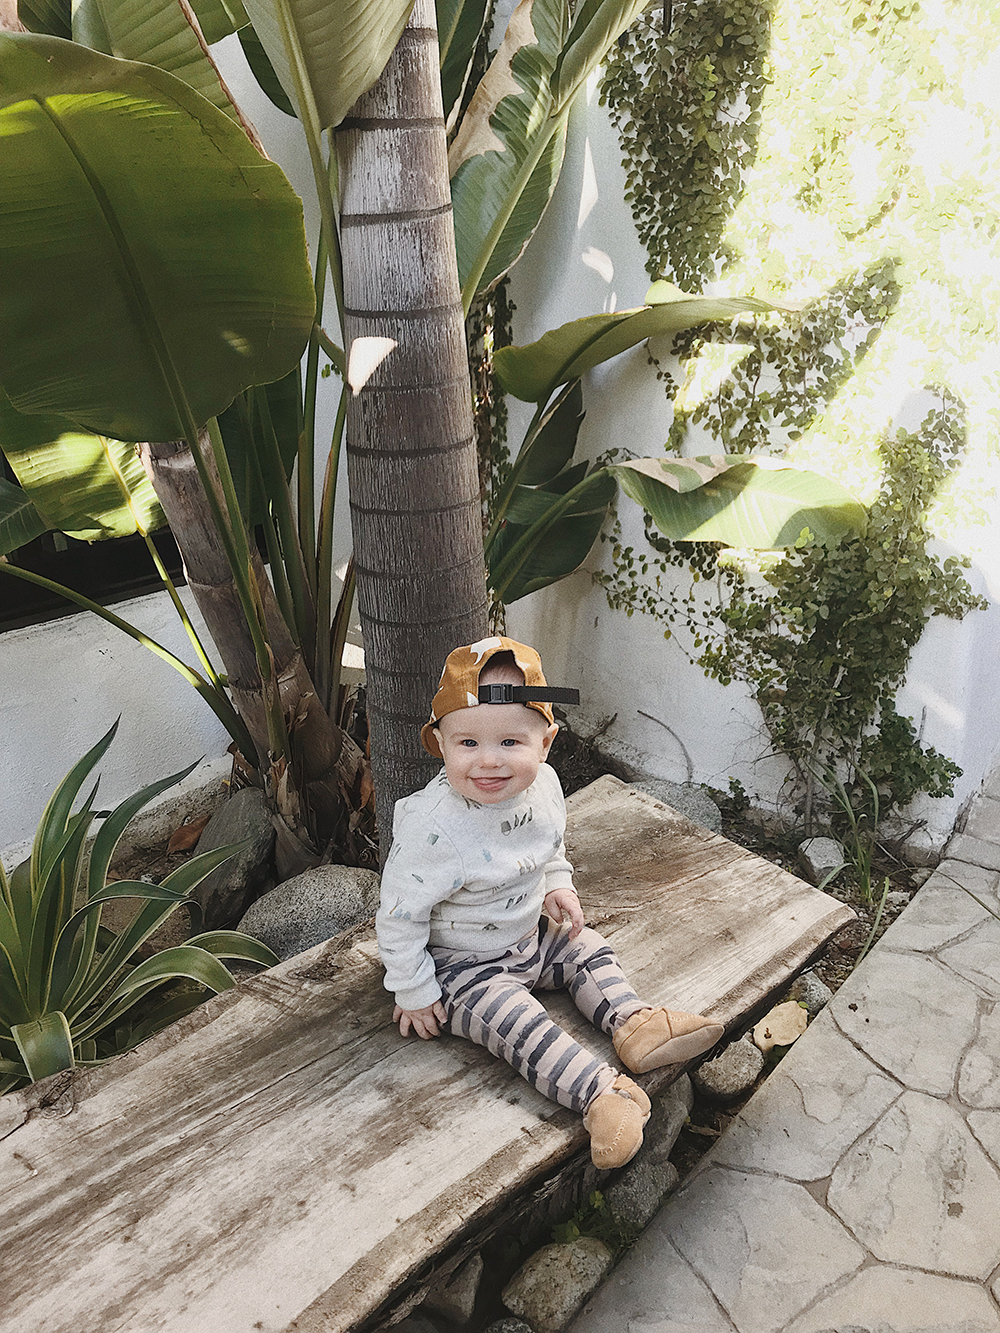 Where To Shop For Hip Baby Boy Clothes Almost Makes Perfect